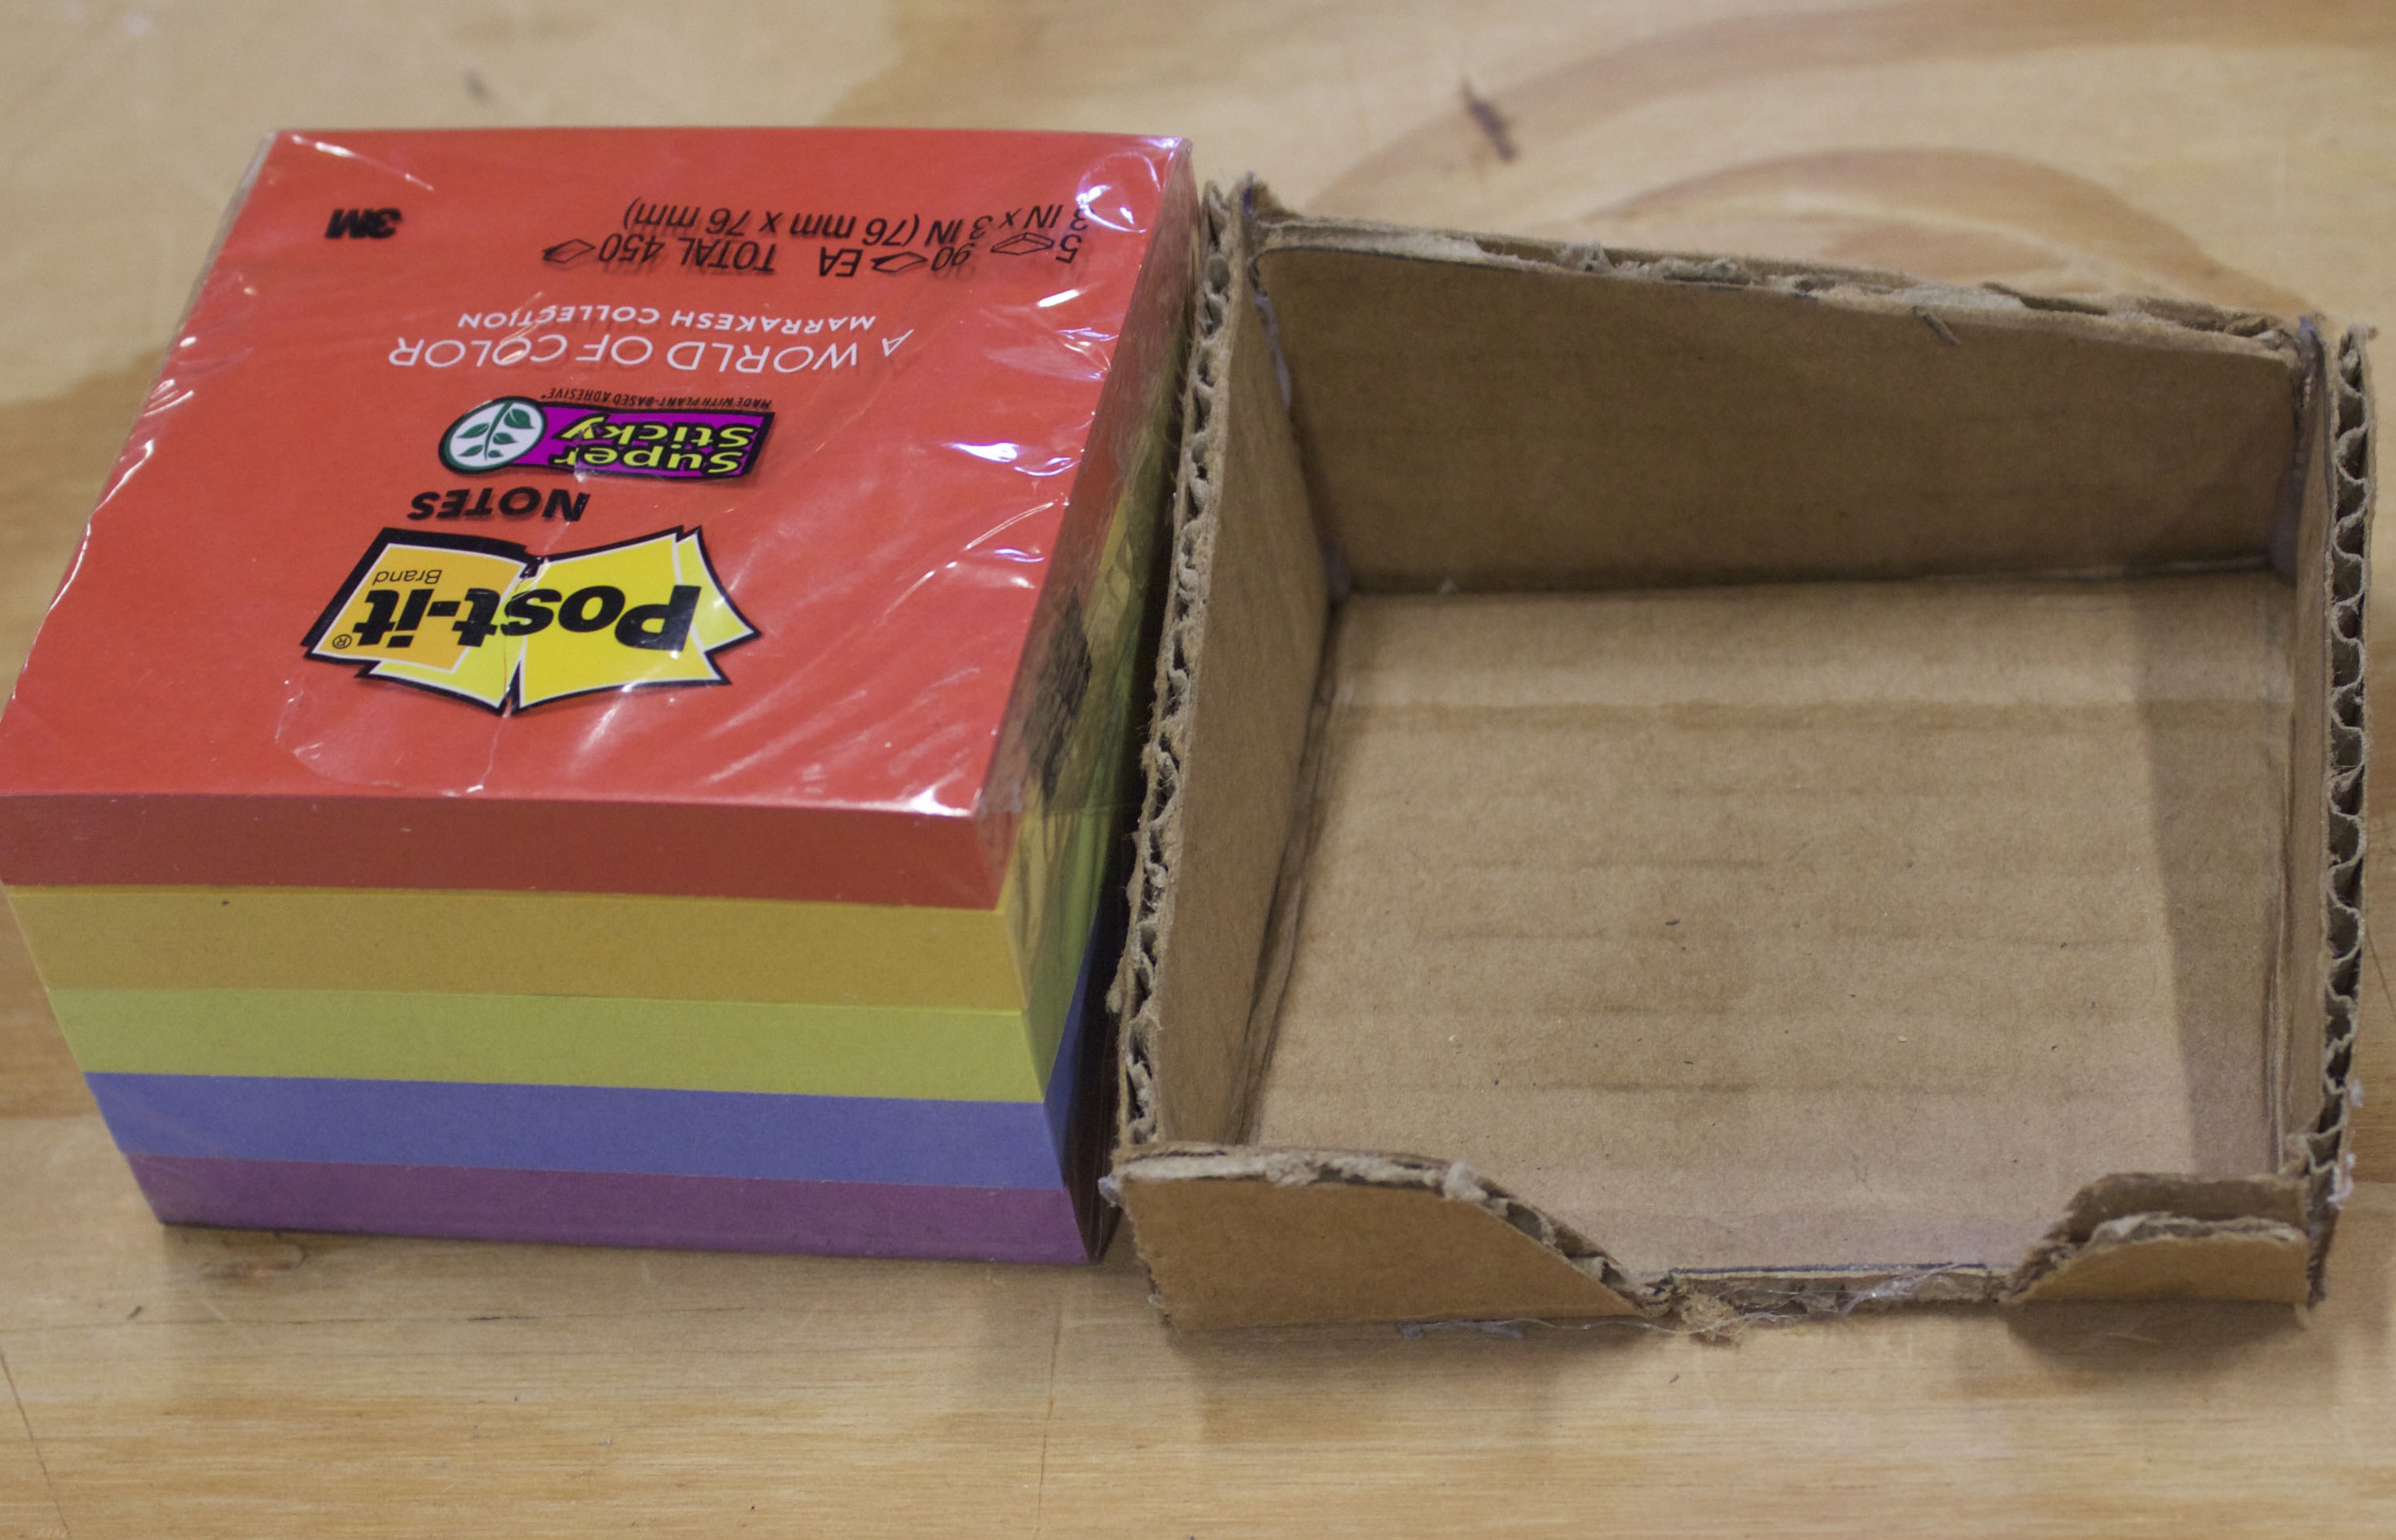 How to Use Cardboard to Prototype Your Projects